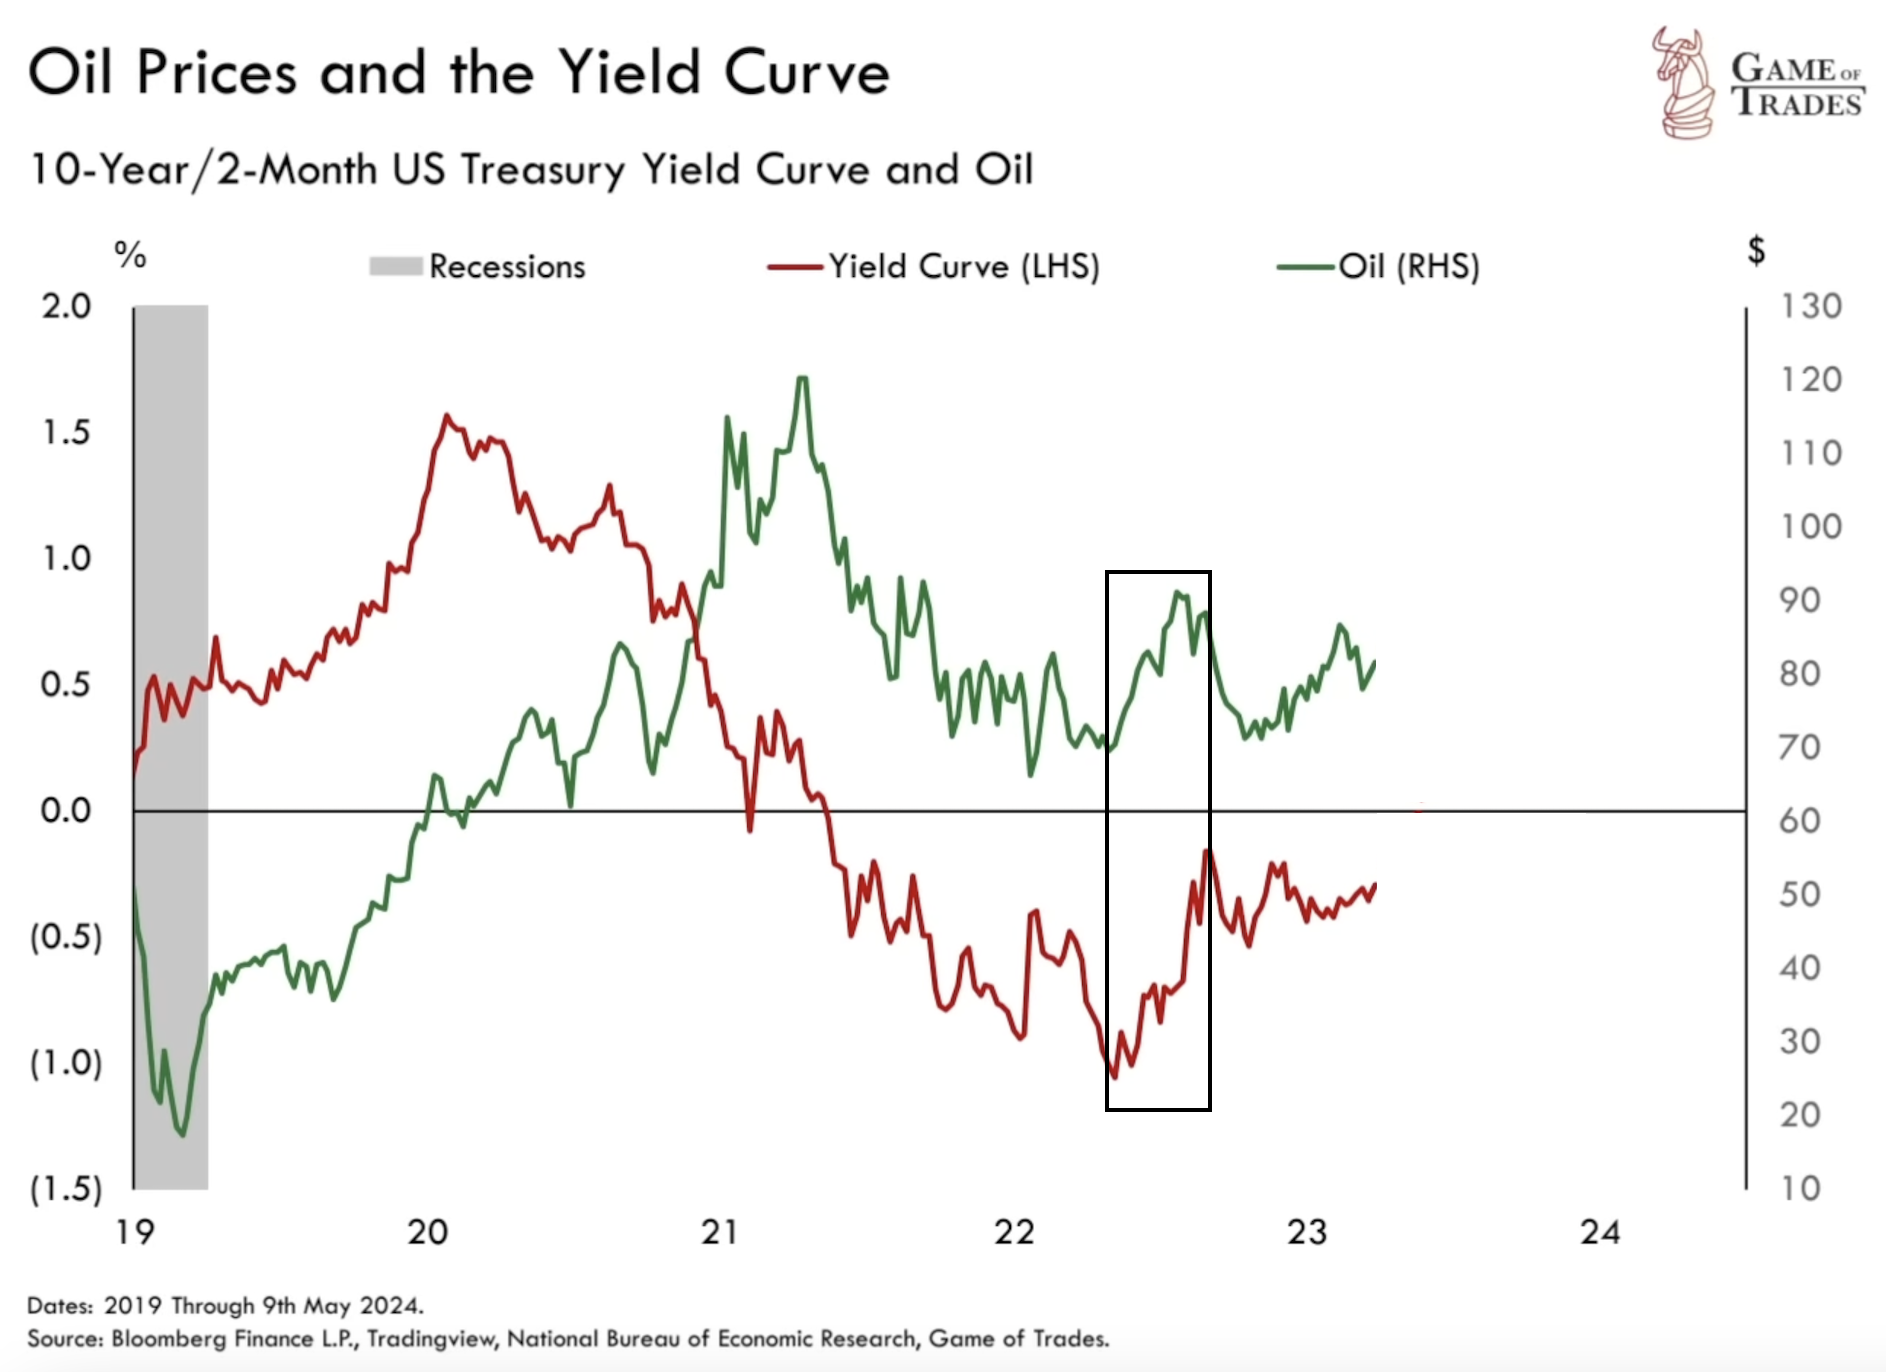 Oil prices and the yield curve